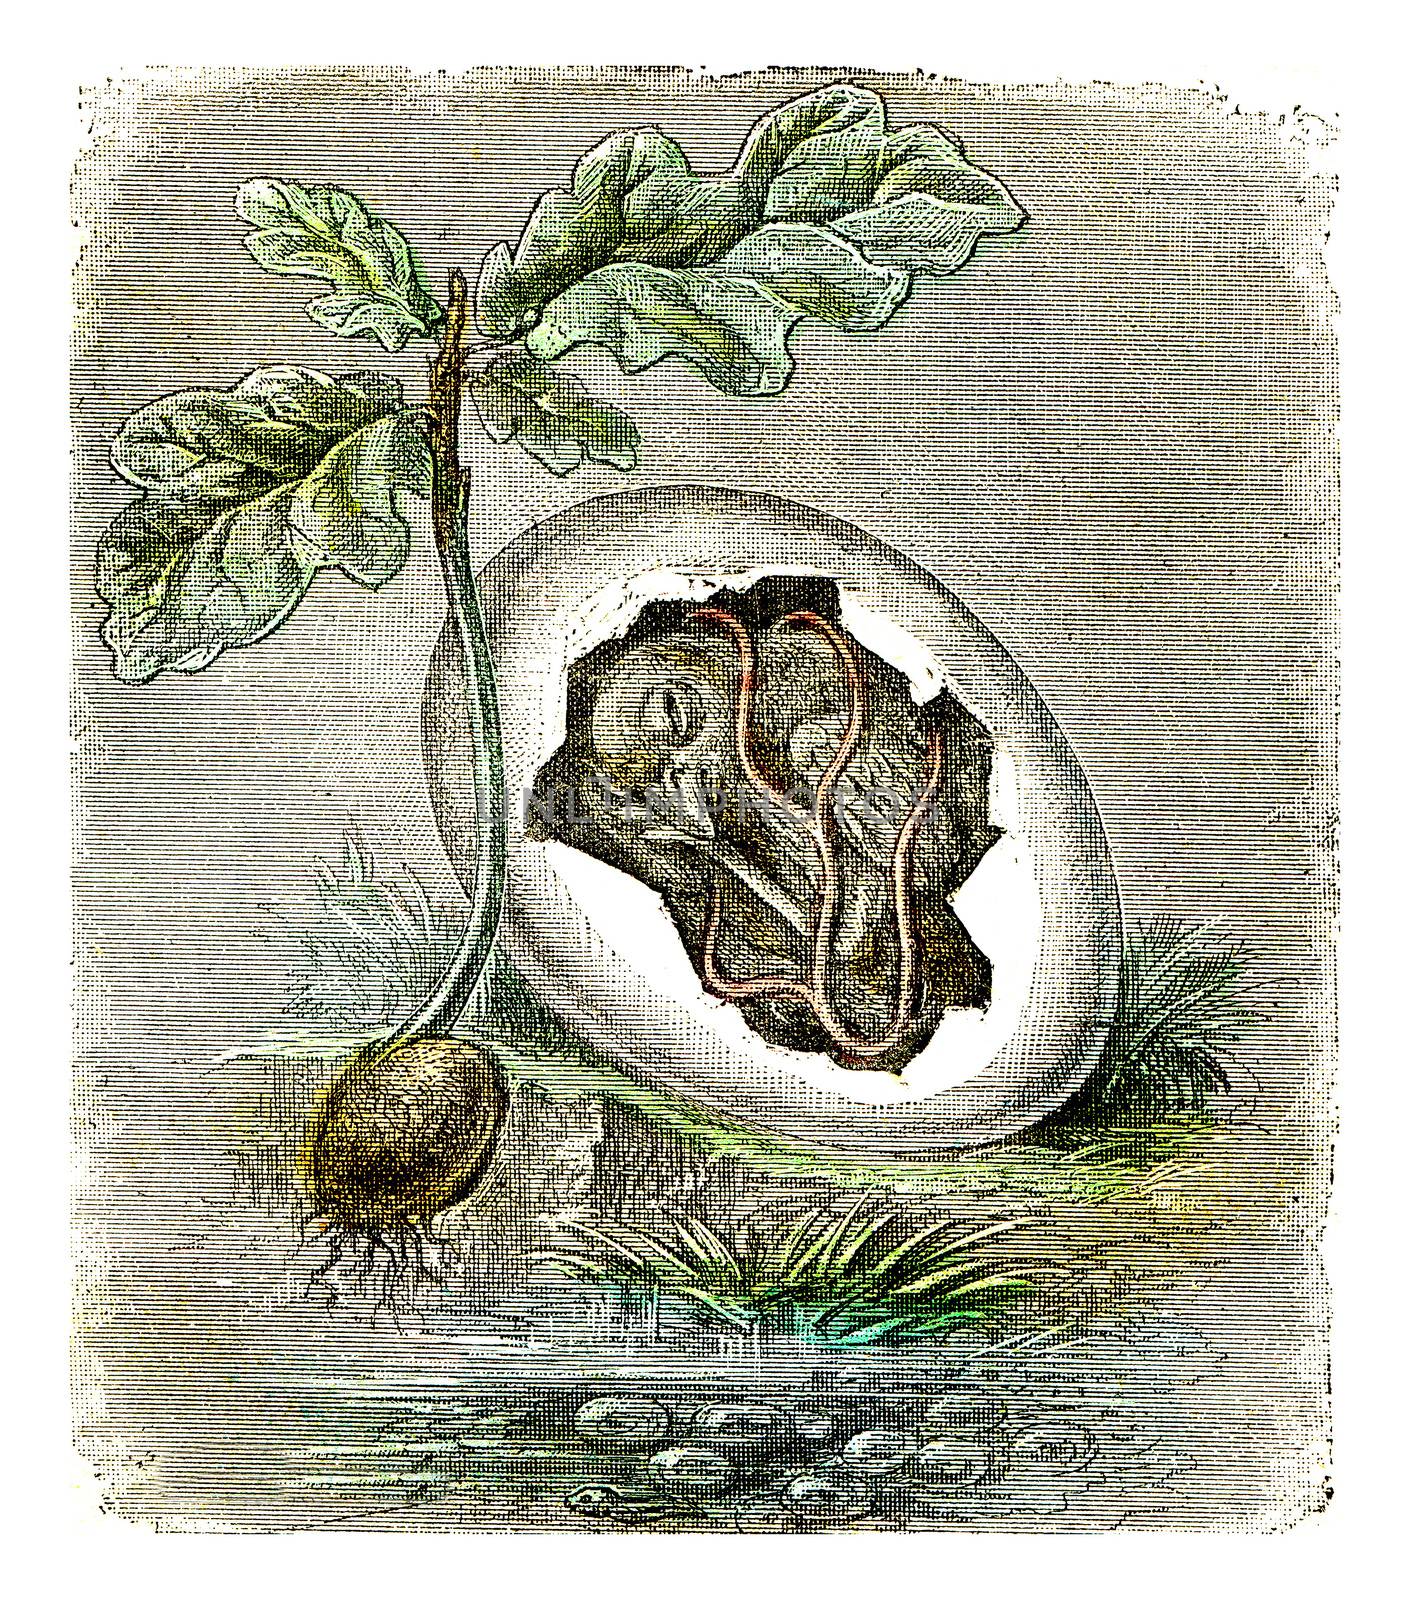 First state of organized beings, The egg and the seed, vintage engraved illustration.
